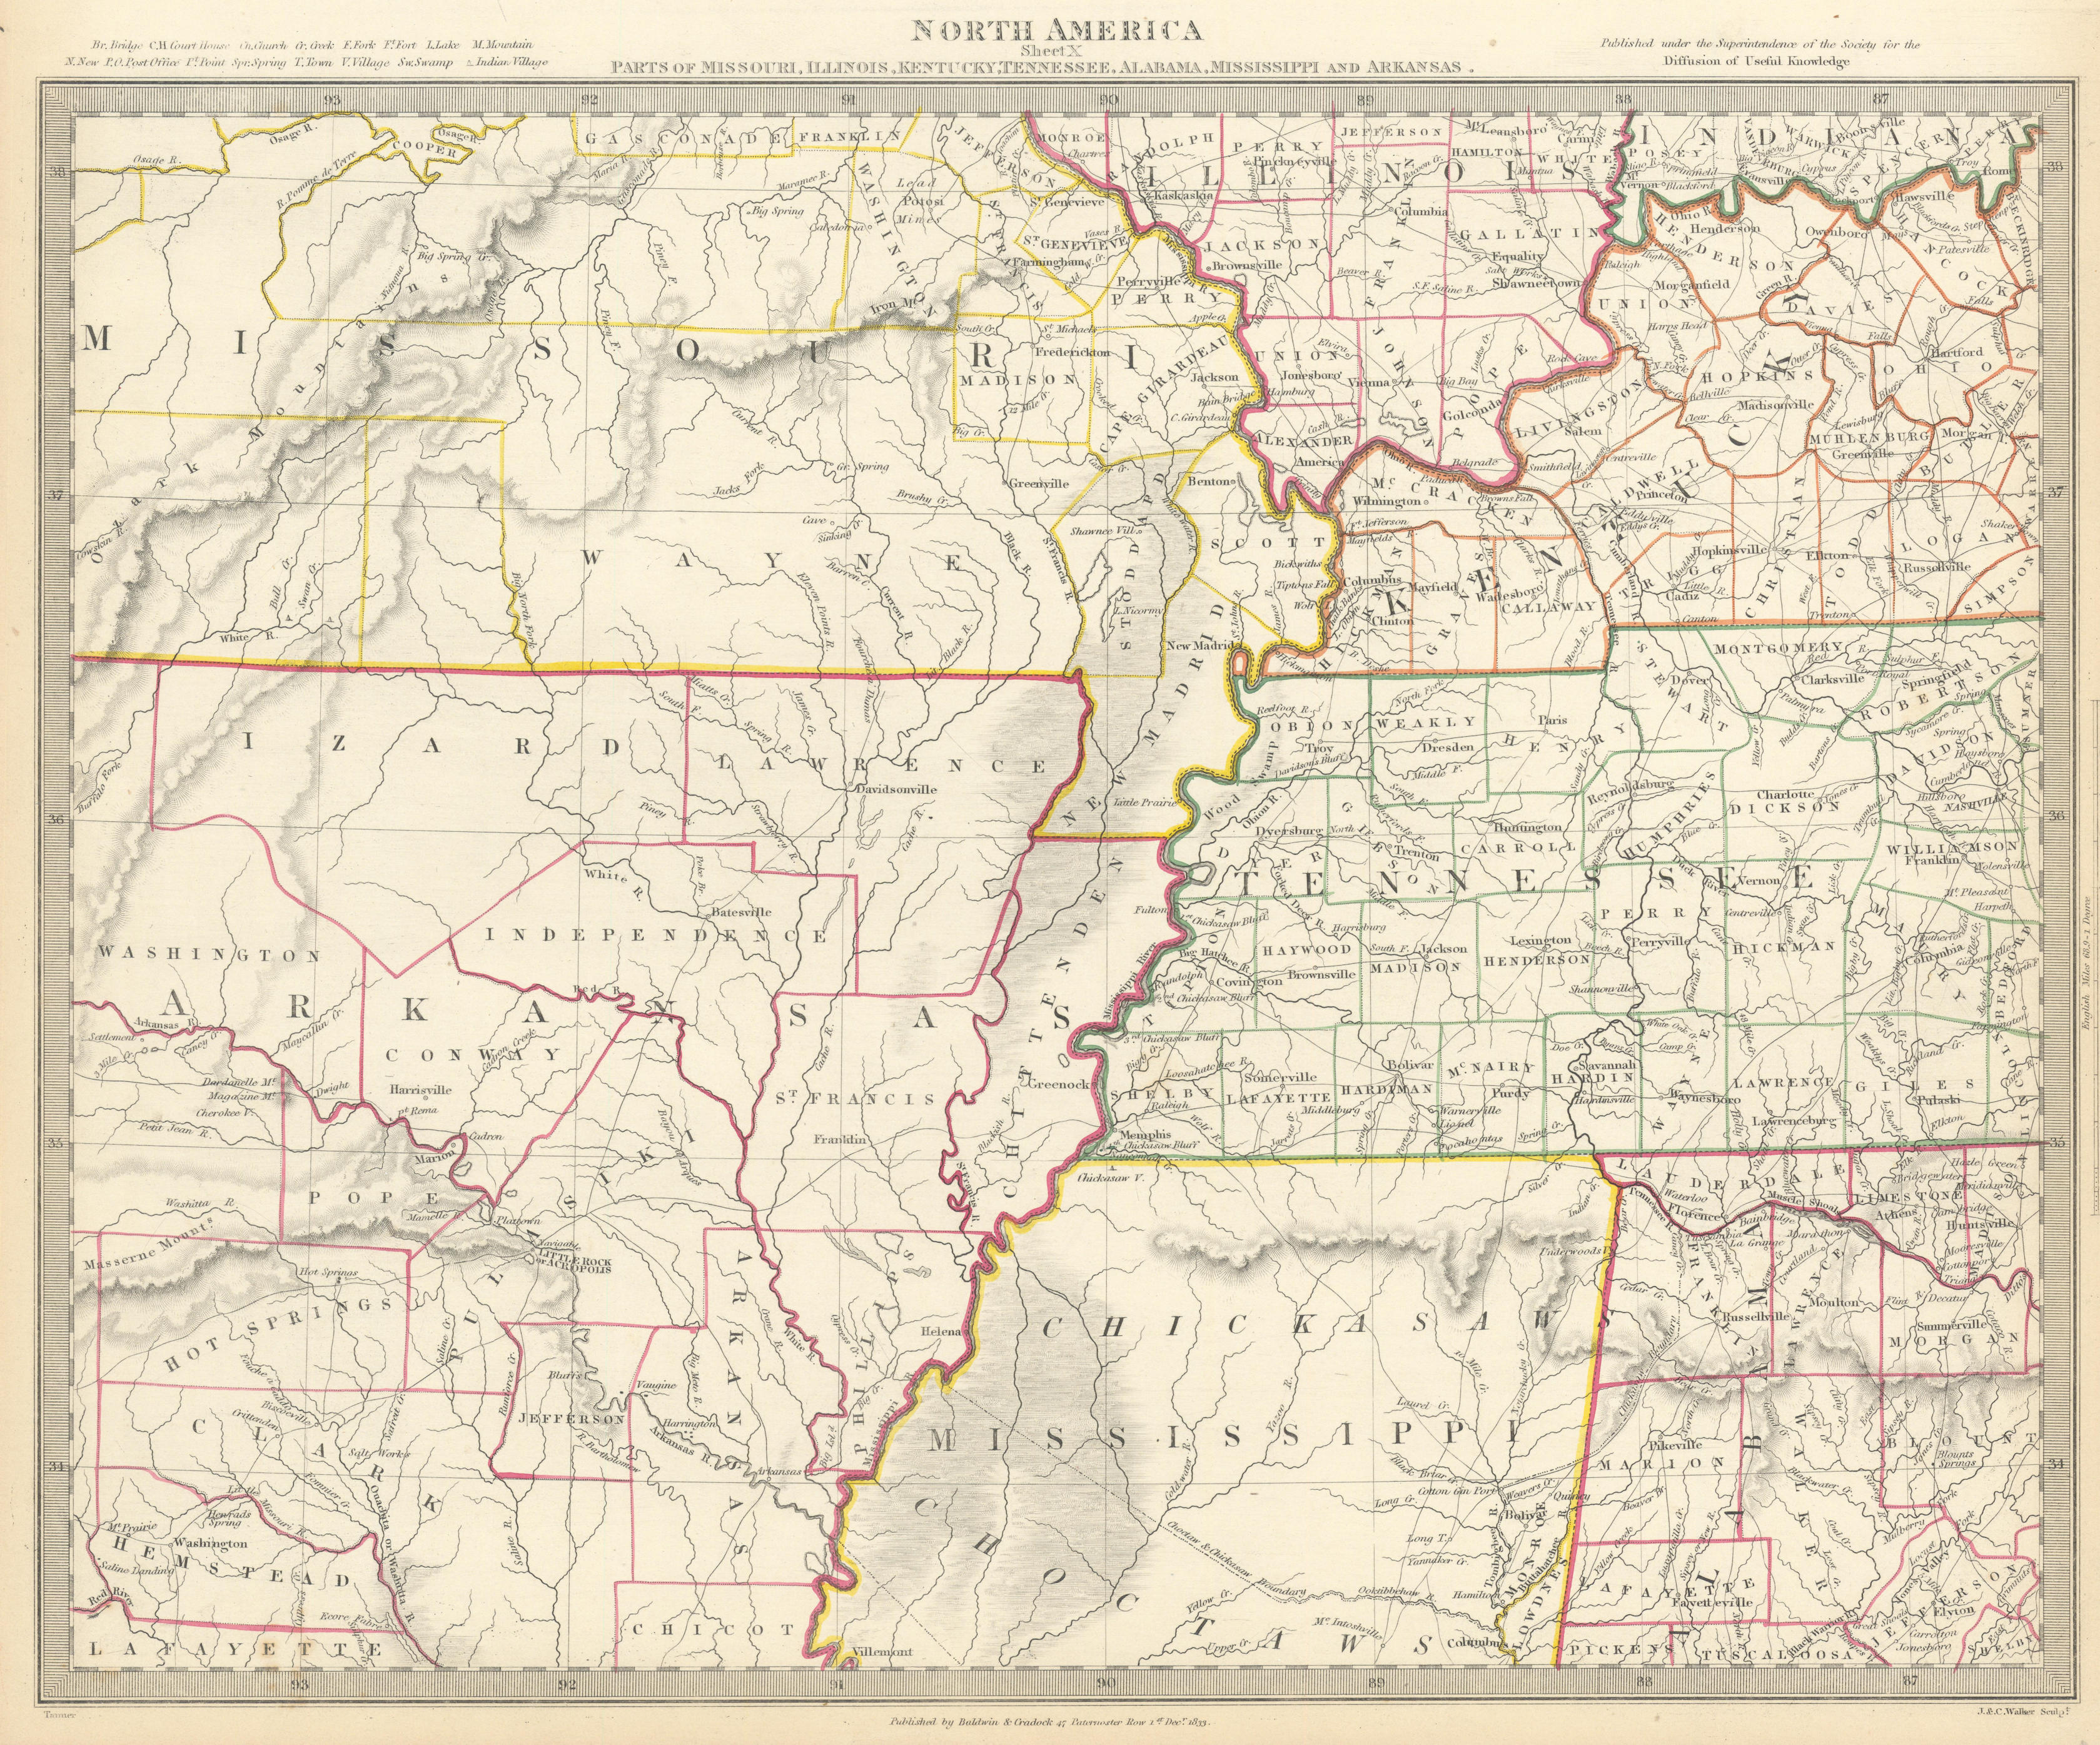 Associate Product USA. AR MO TN MS IL IN KY AL. Choctaw Chickasaw boundaries. SDUK 1844 old map